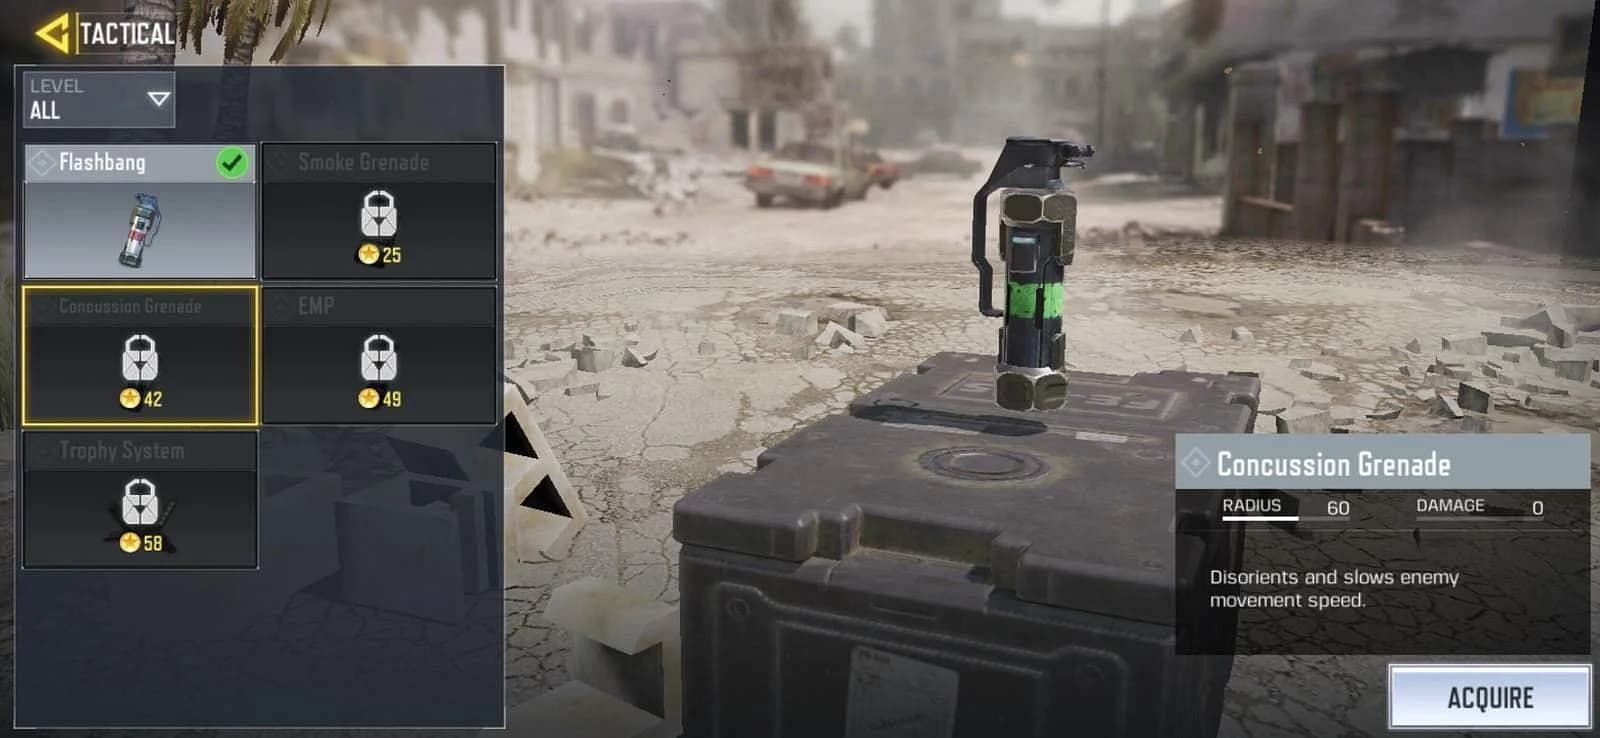 The right equipment is an important choice in COD Mobile (Image via Activision)